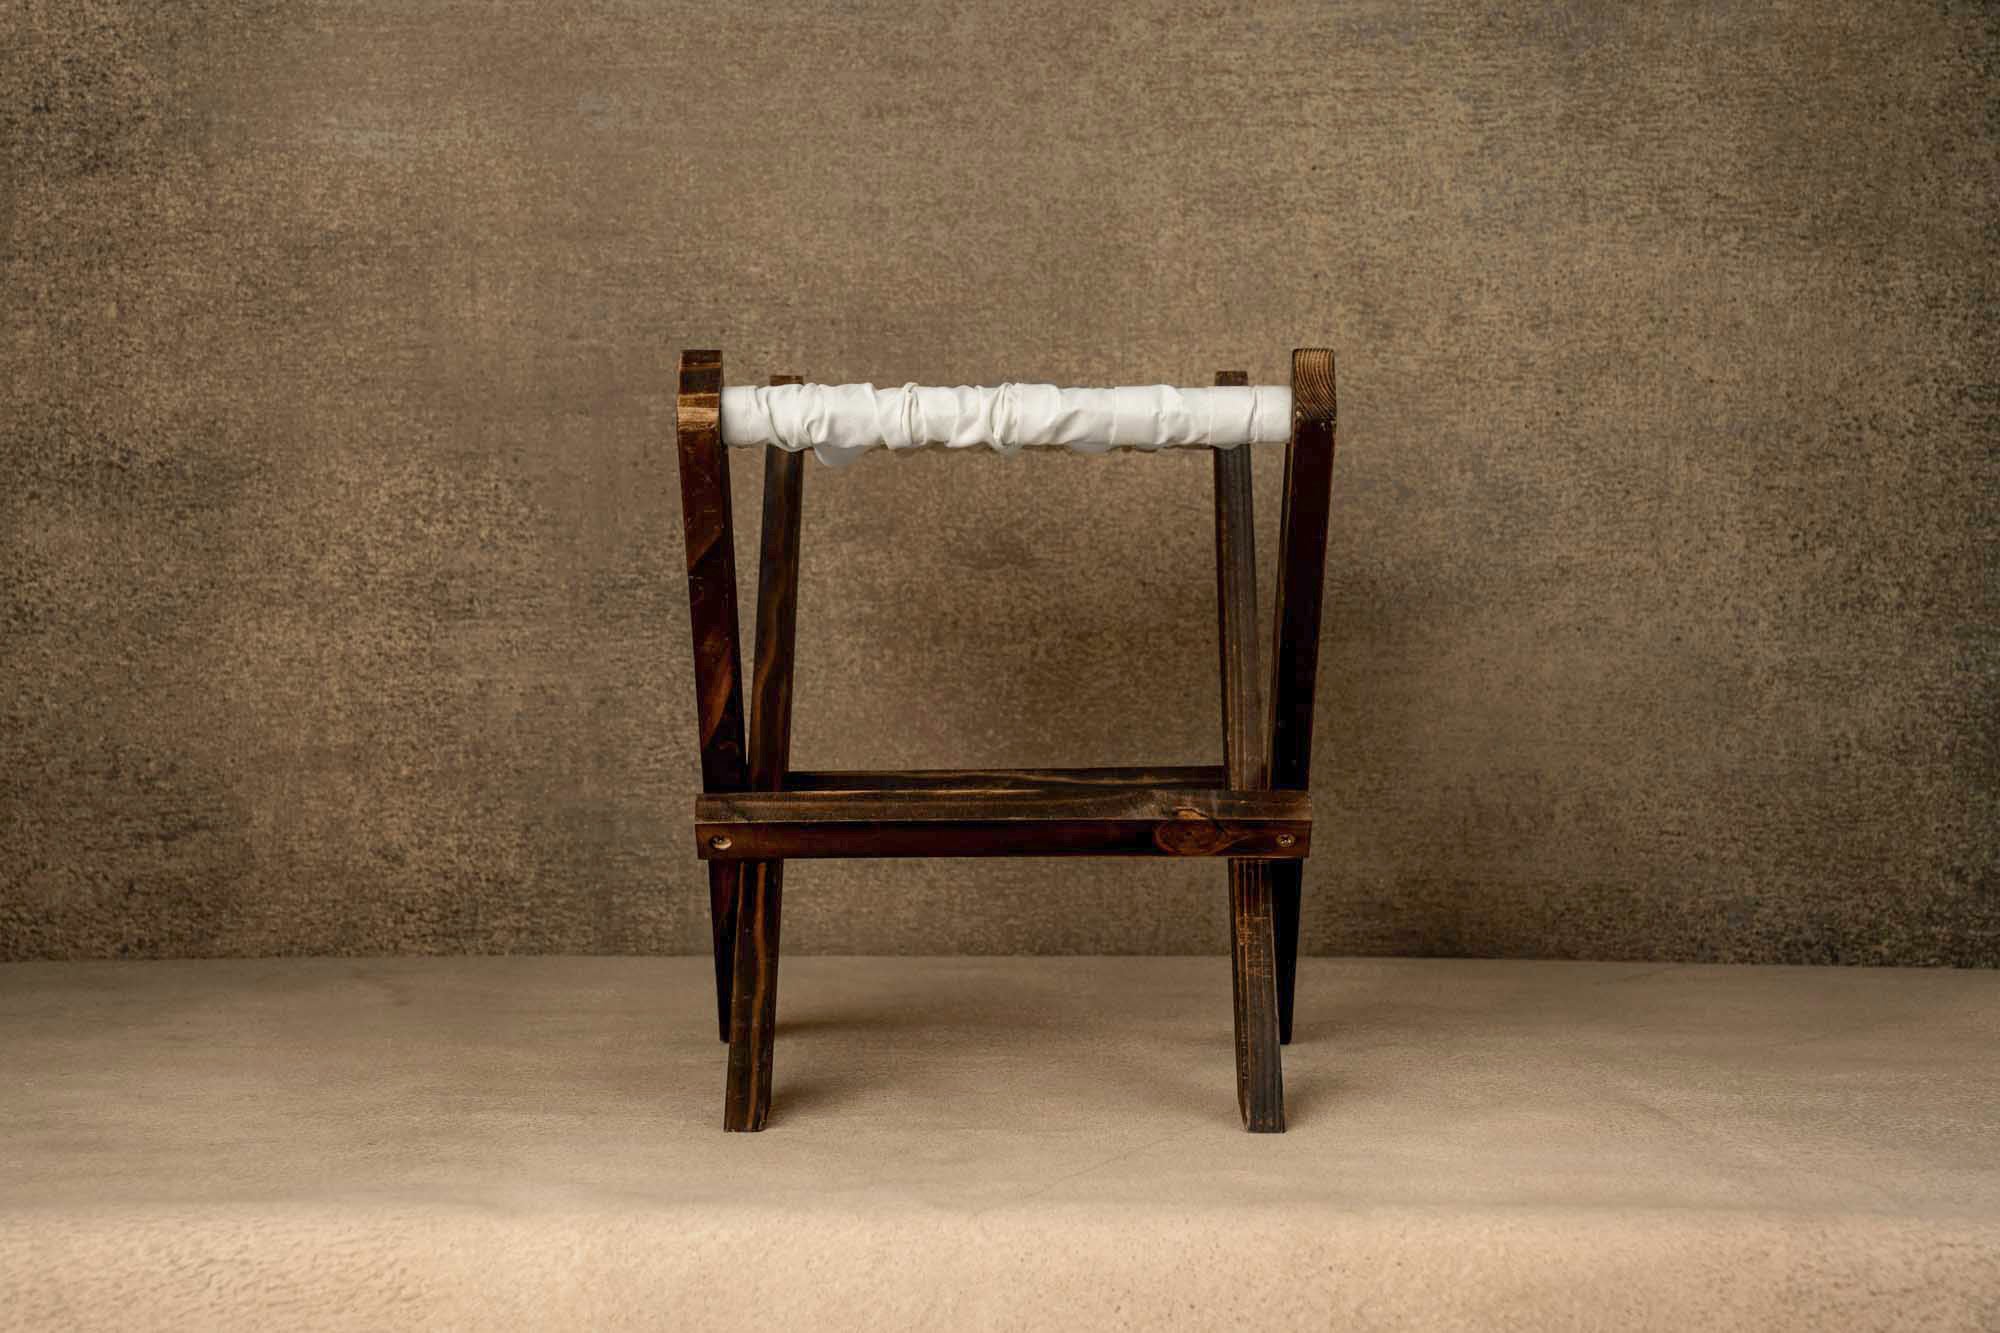 Kate Newborn Wooden Chair Photography Props